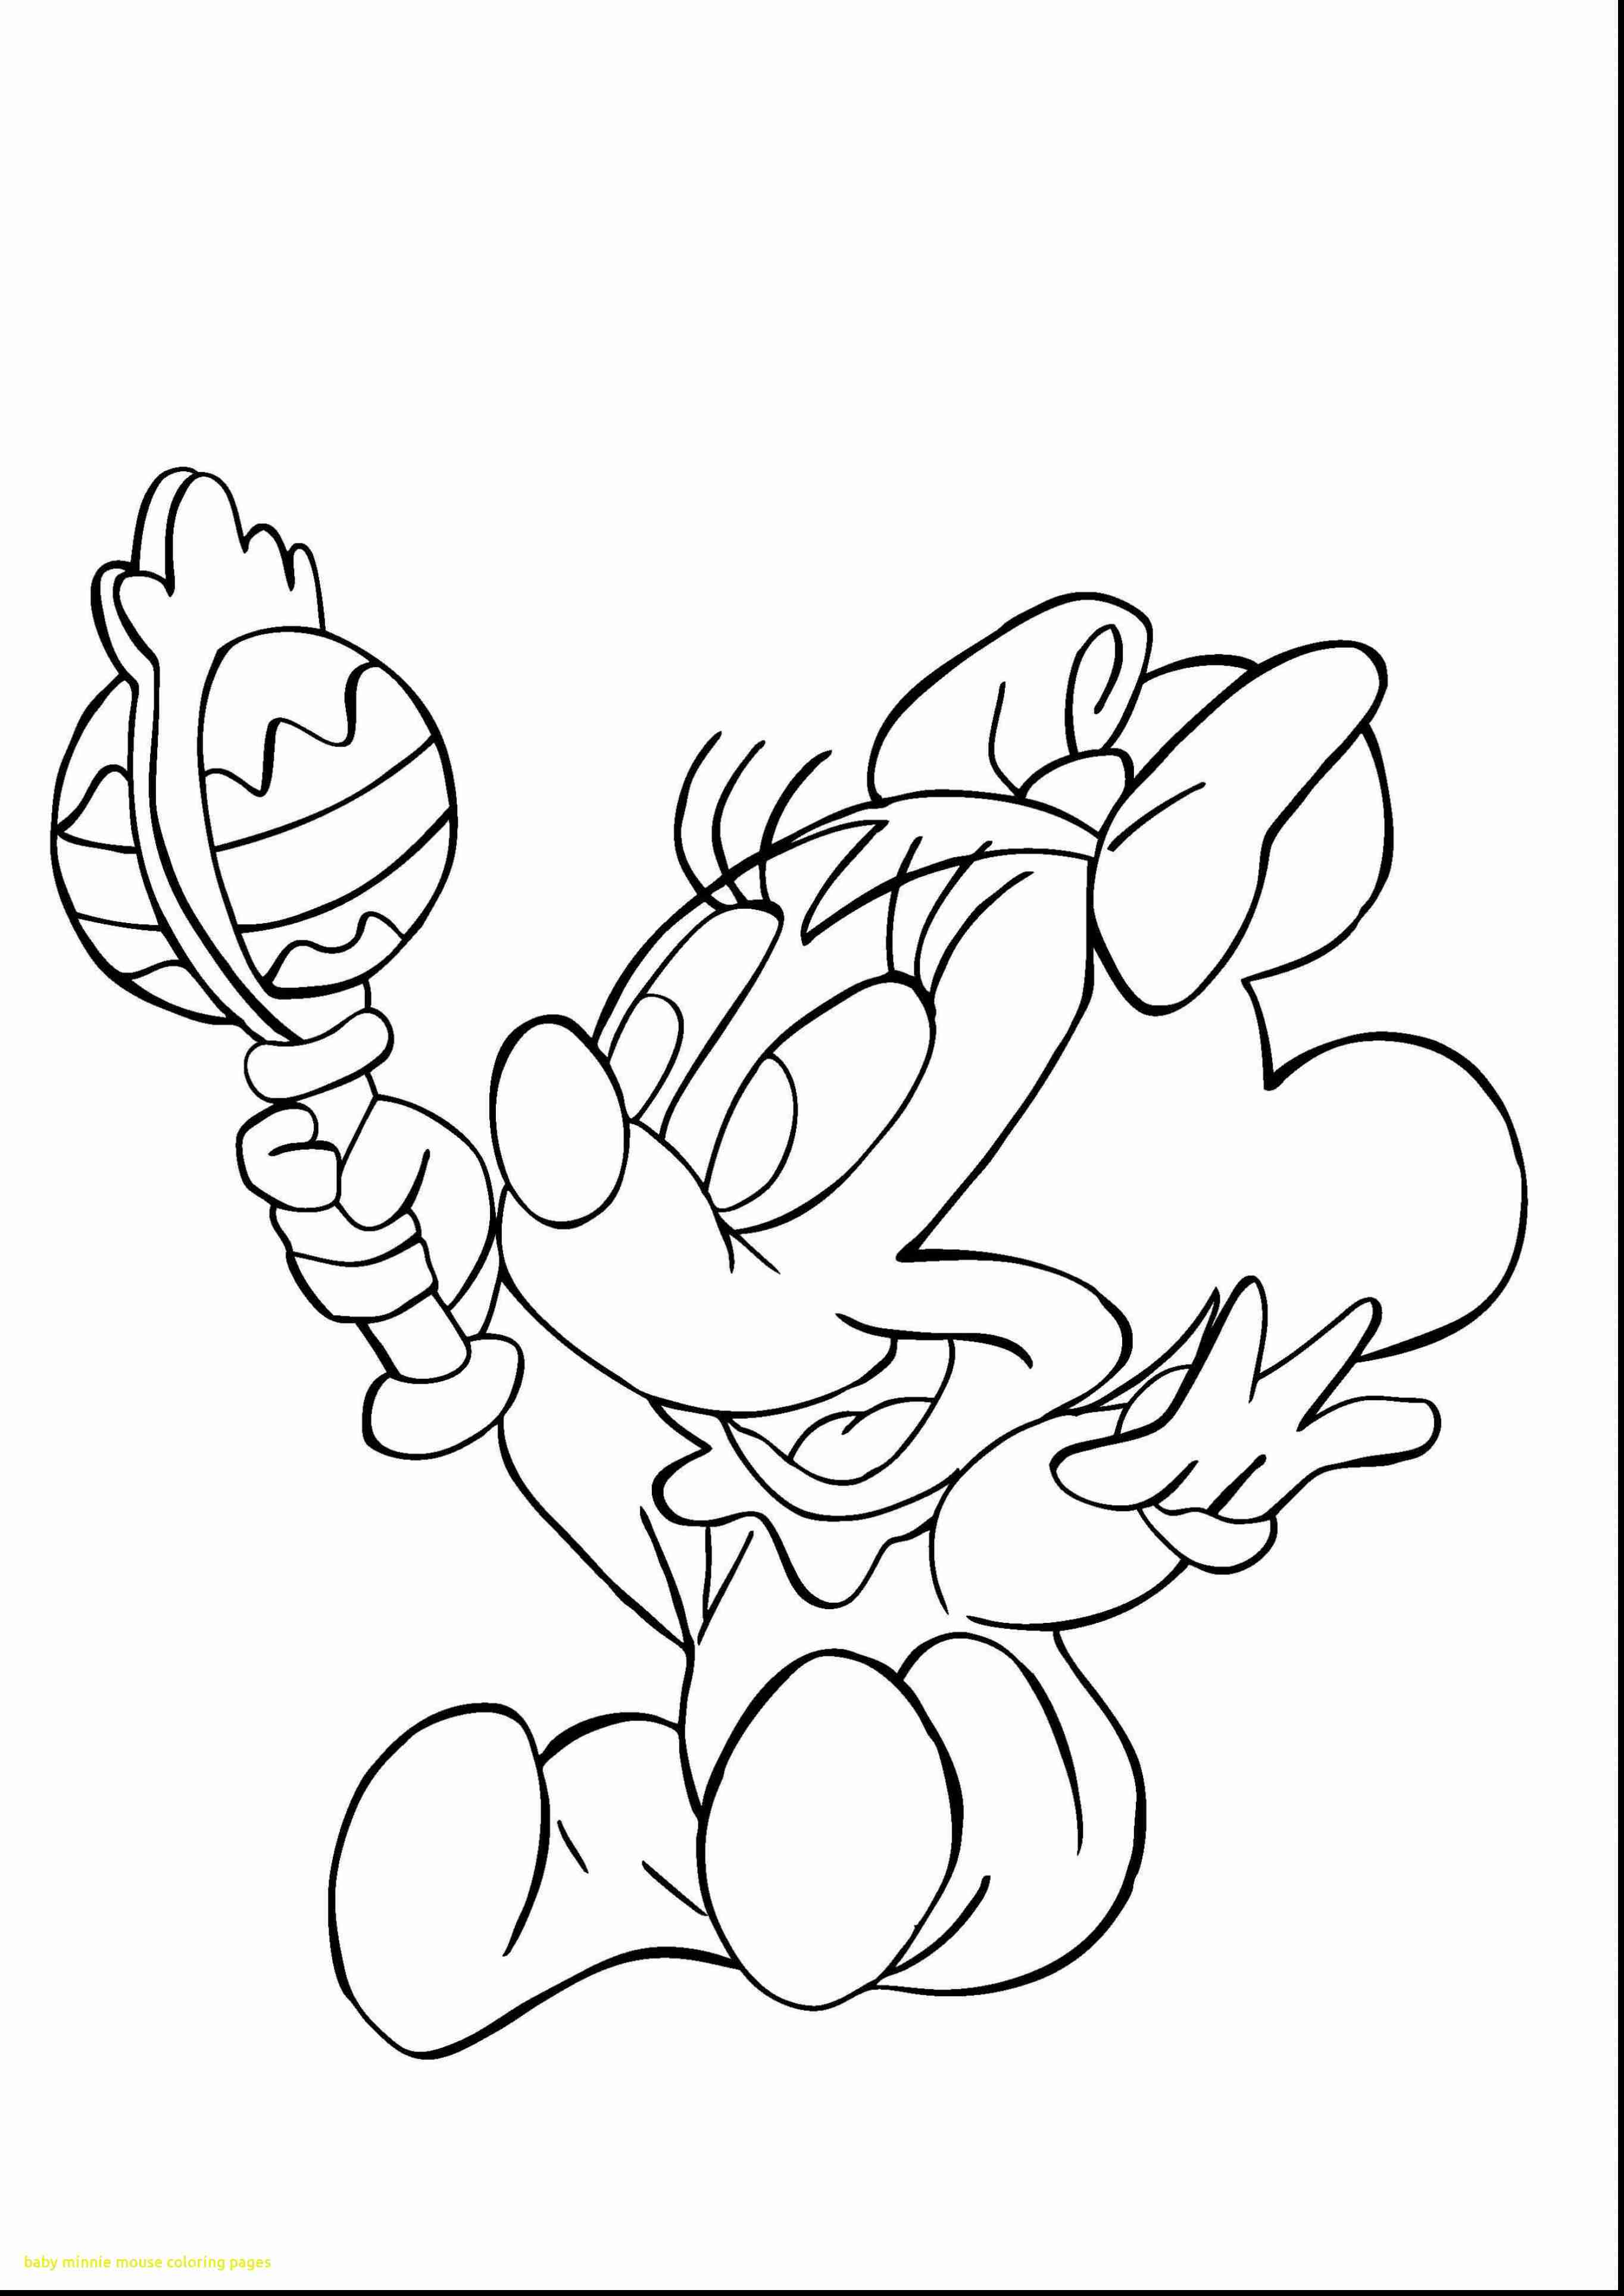 Mickey Mouse Characters Coloring Pages at GetColorings.com | Free ...